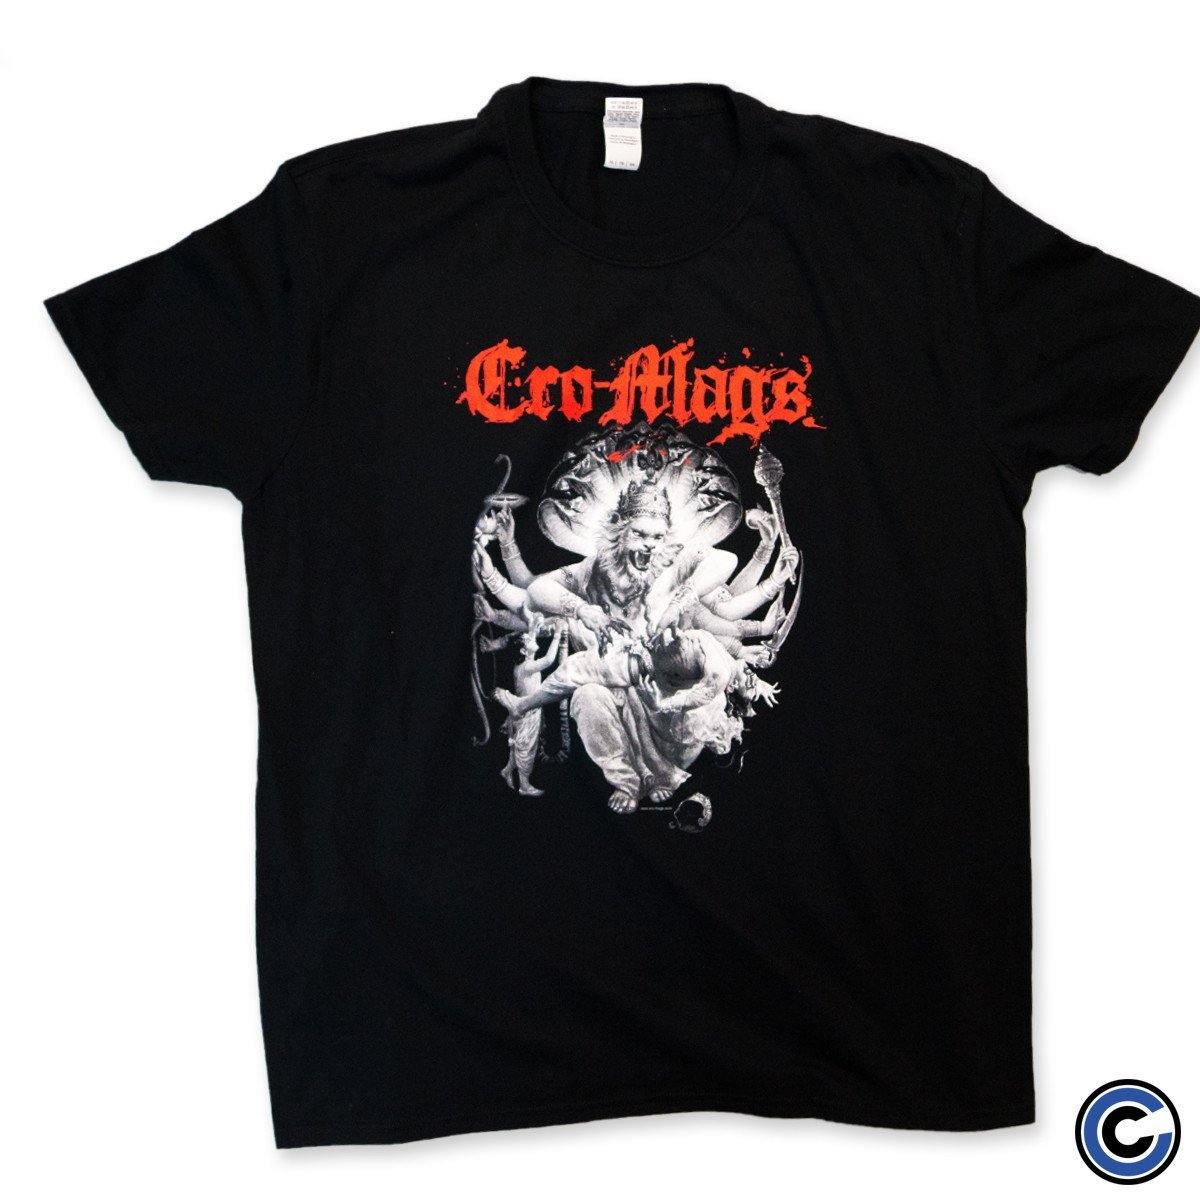 Buy – Cro-Mags "Best Wishes" Shirt – Band & Music Merch – Cold Cuts Merch